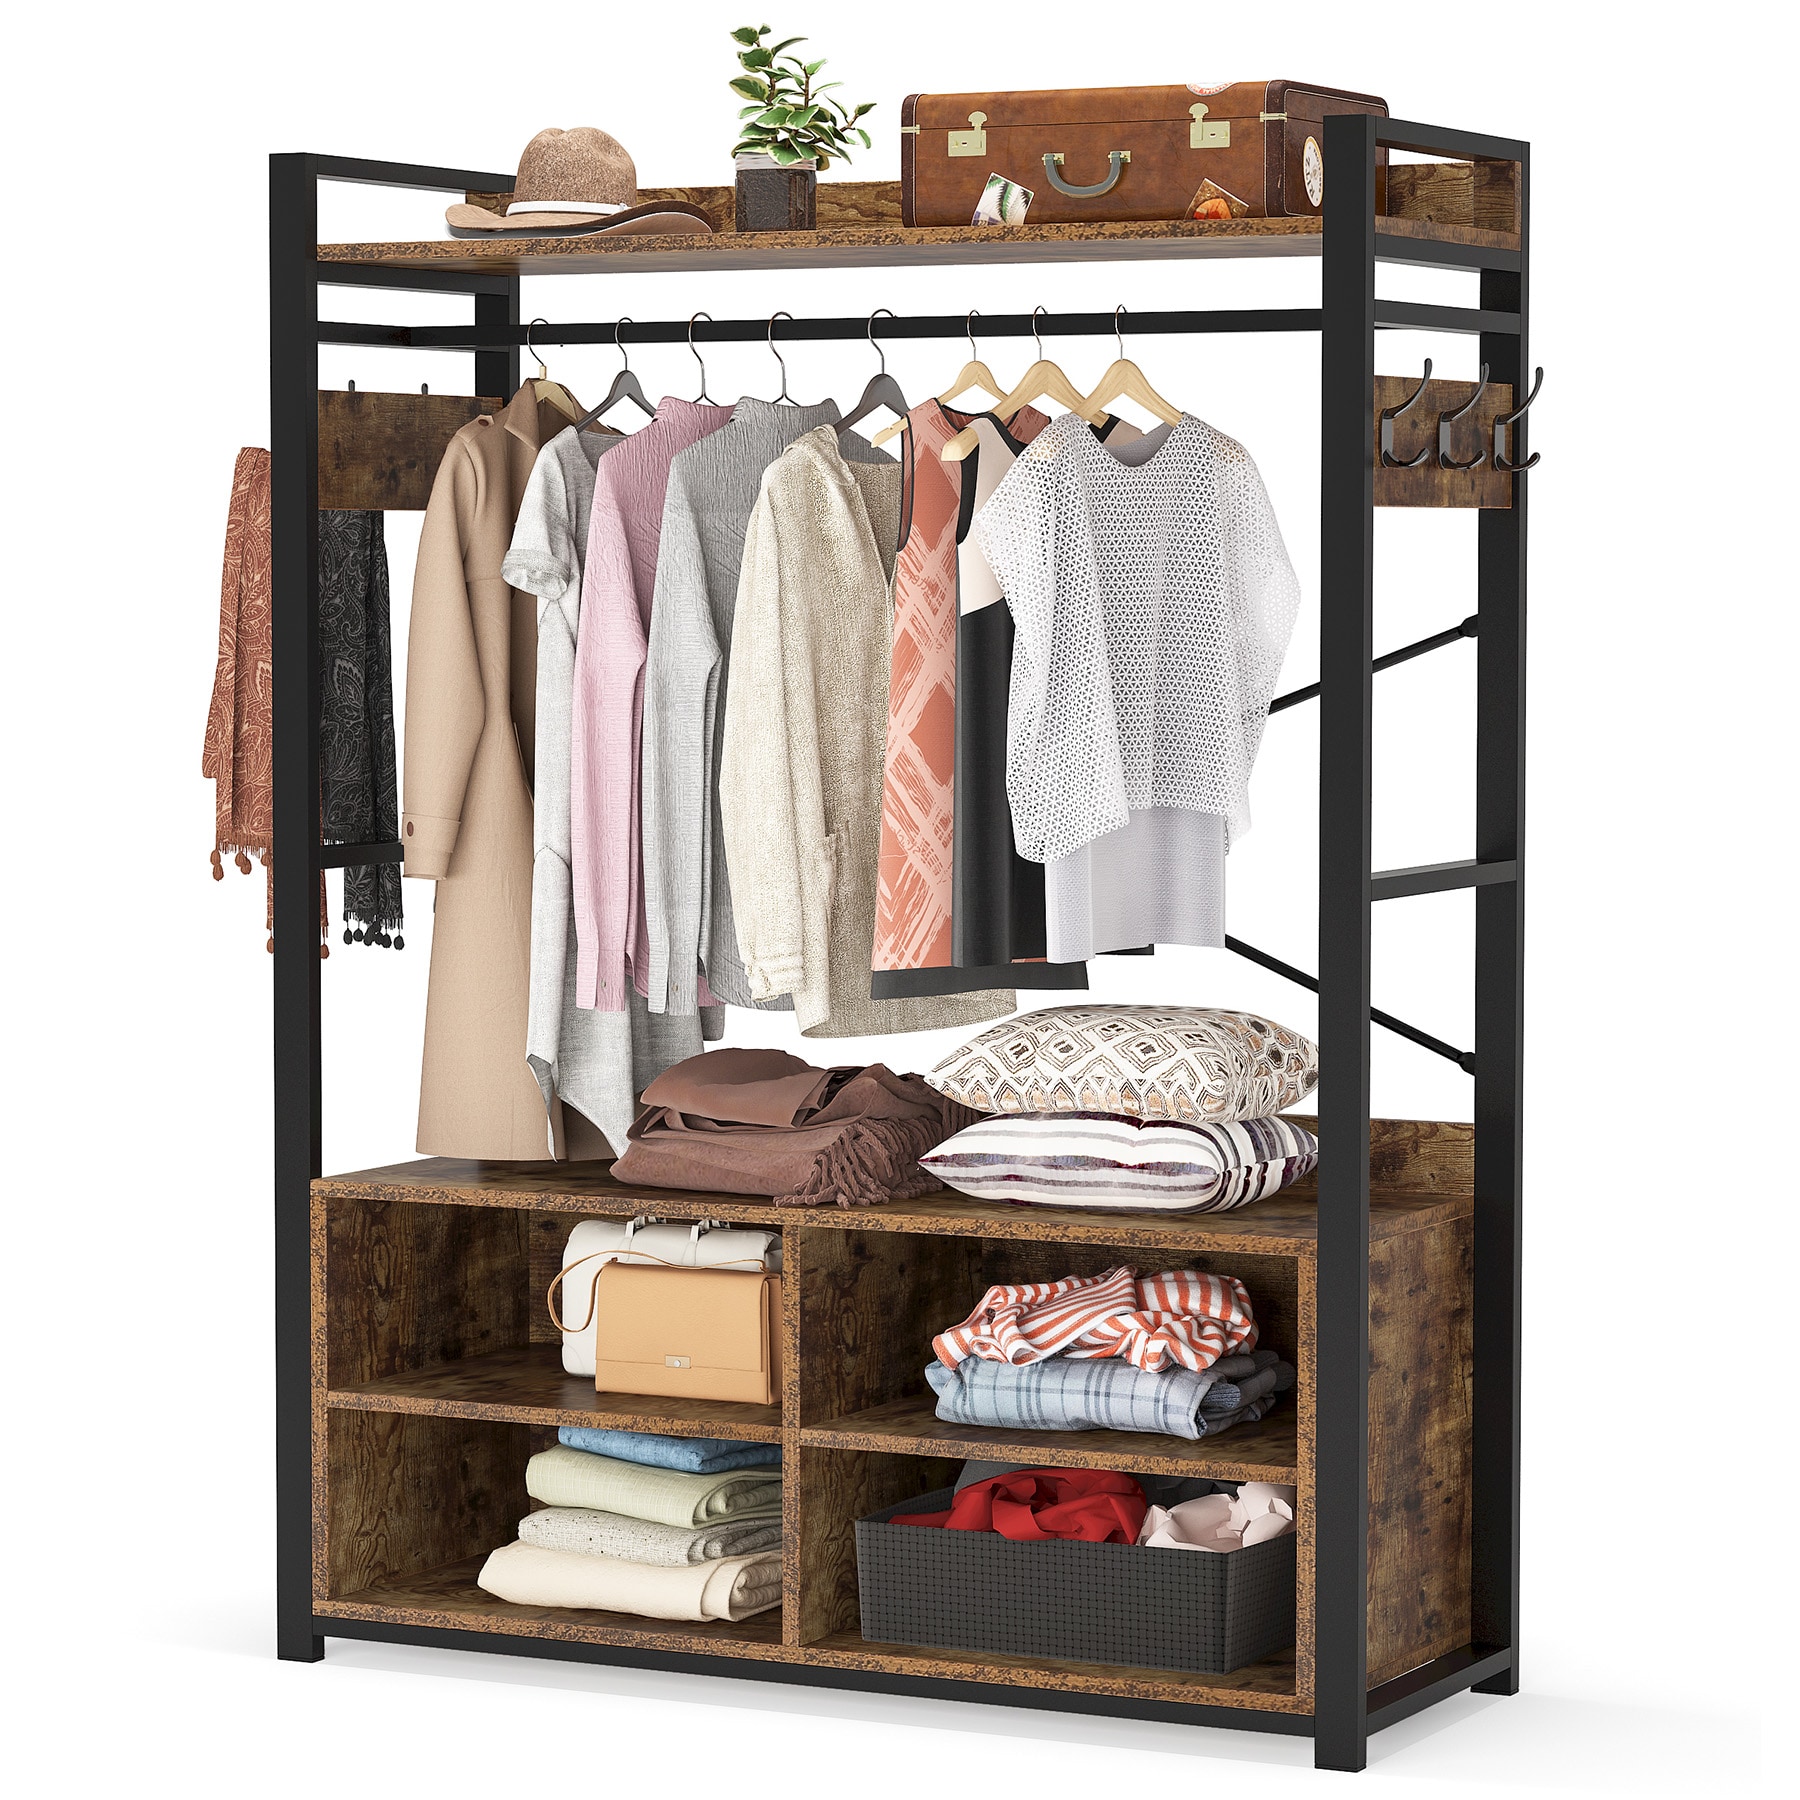 Tribesigns Brown Steel Freestanding Clothing Rack, Large Shelves, 47.24-in Wide Garment Rod, Sturdy & Spacious